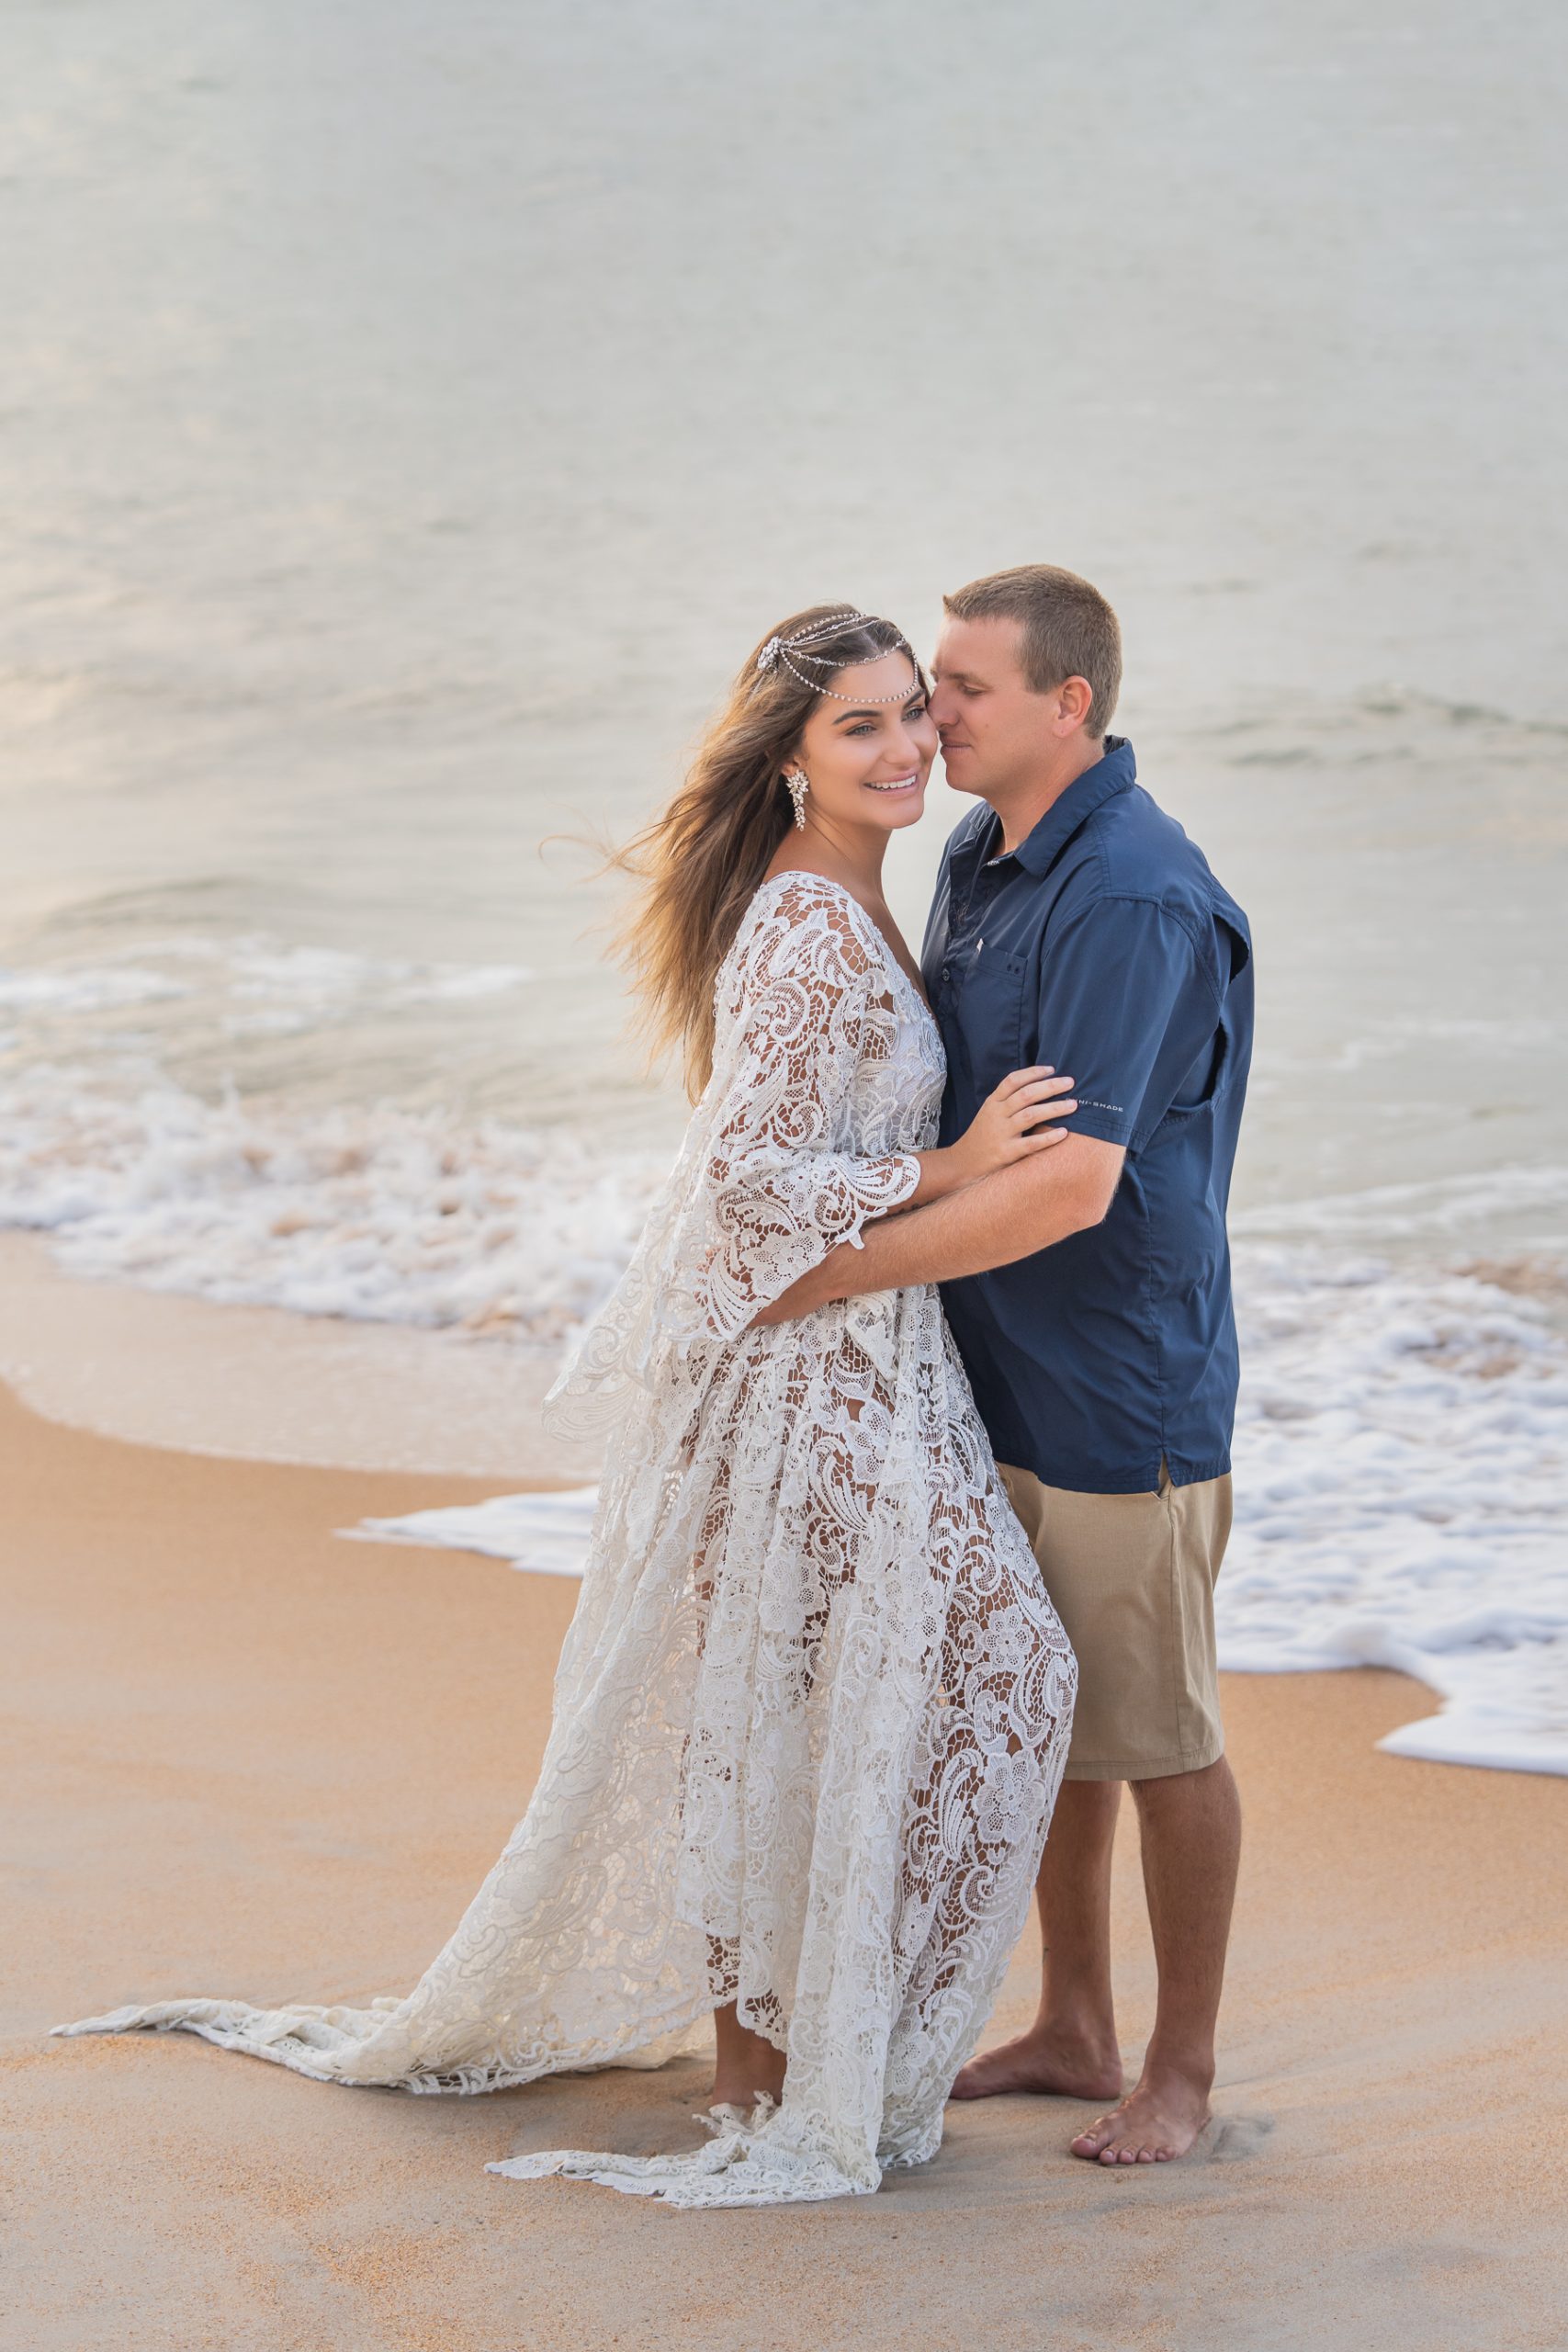 Boudoir photo of girl in white lace dress with husband near sea 4